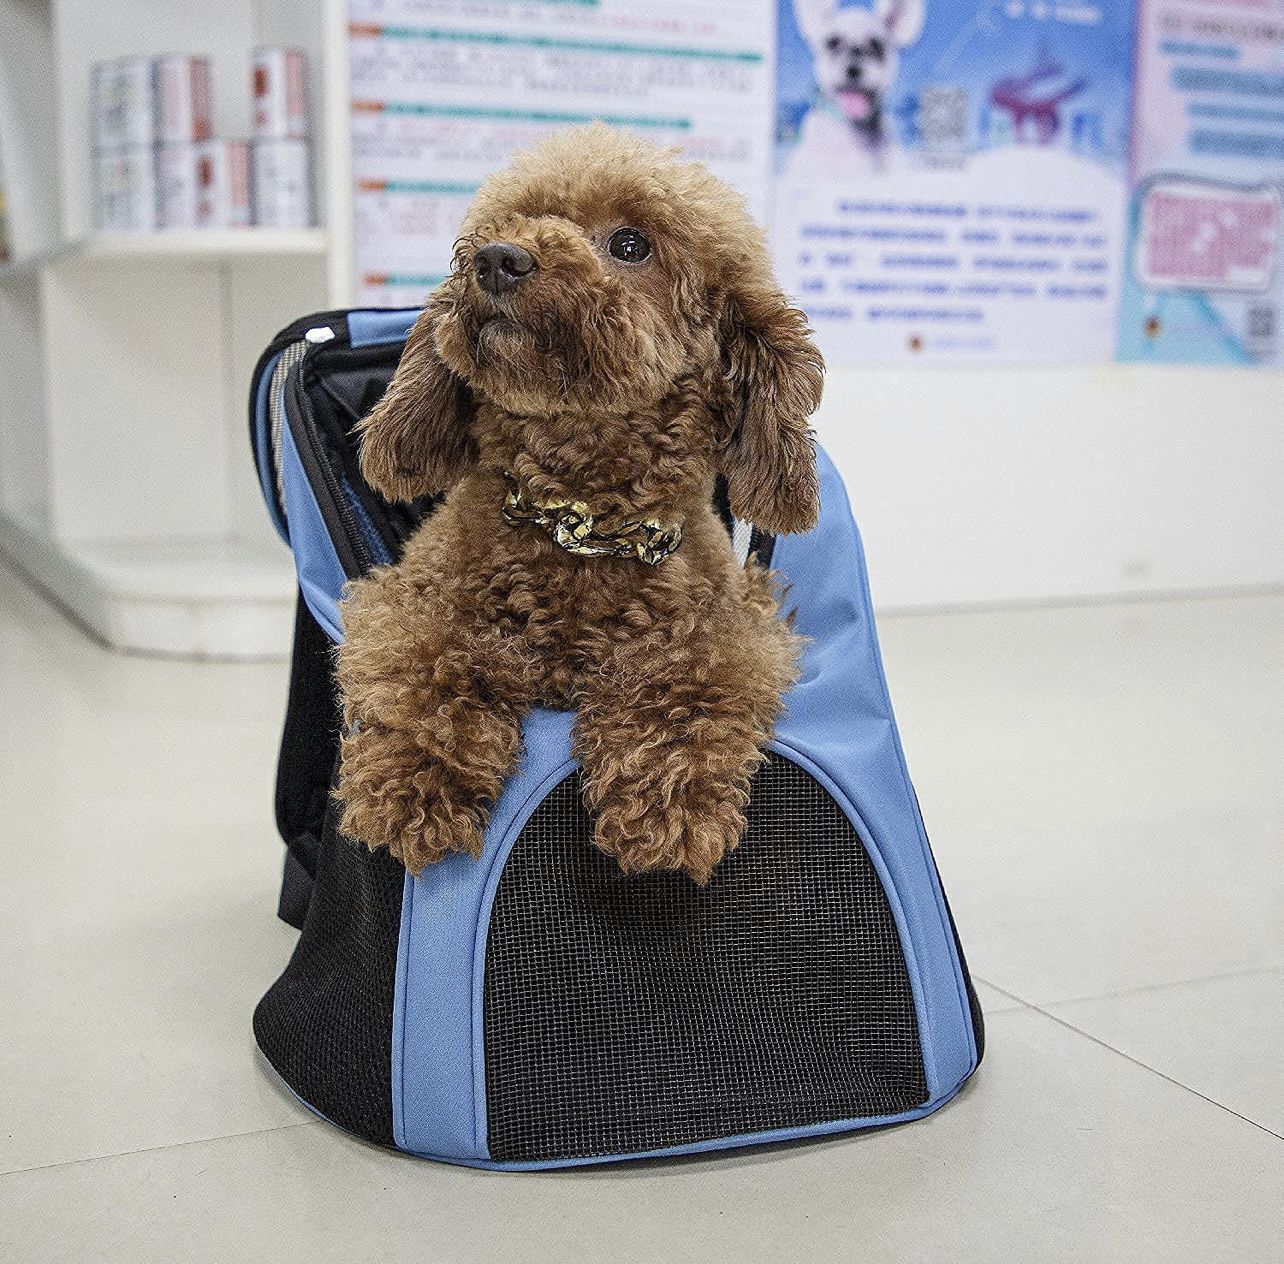 Dog Carrier Backpacks for Small Dogs, Cat Backpack with Breathable Mesh Ventilated Design